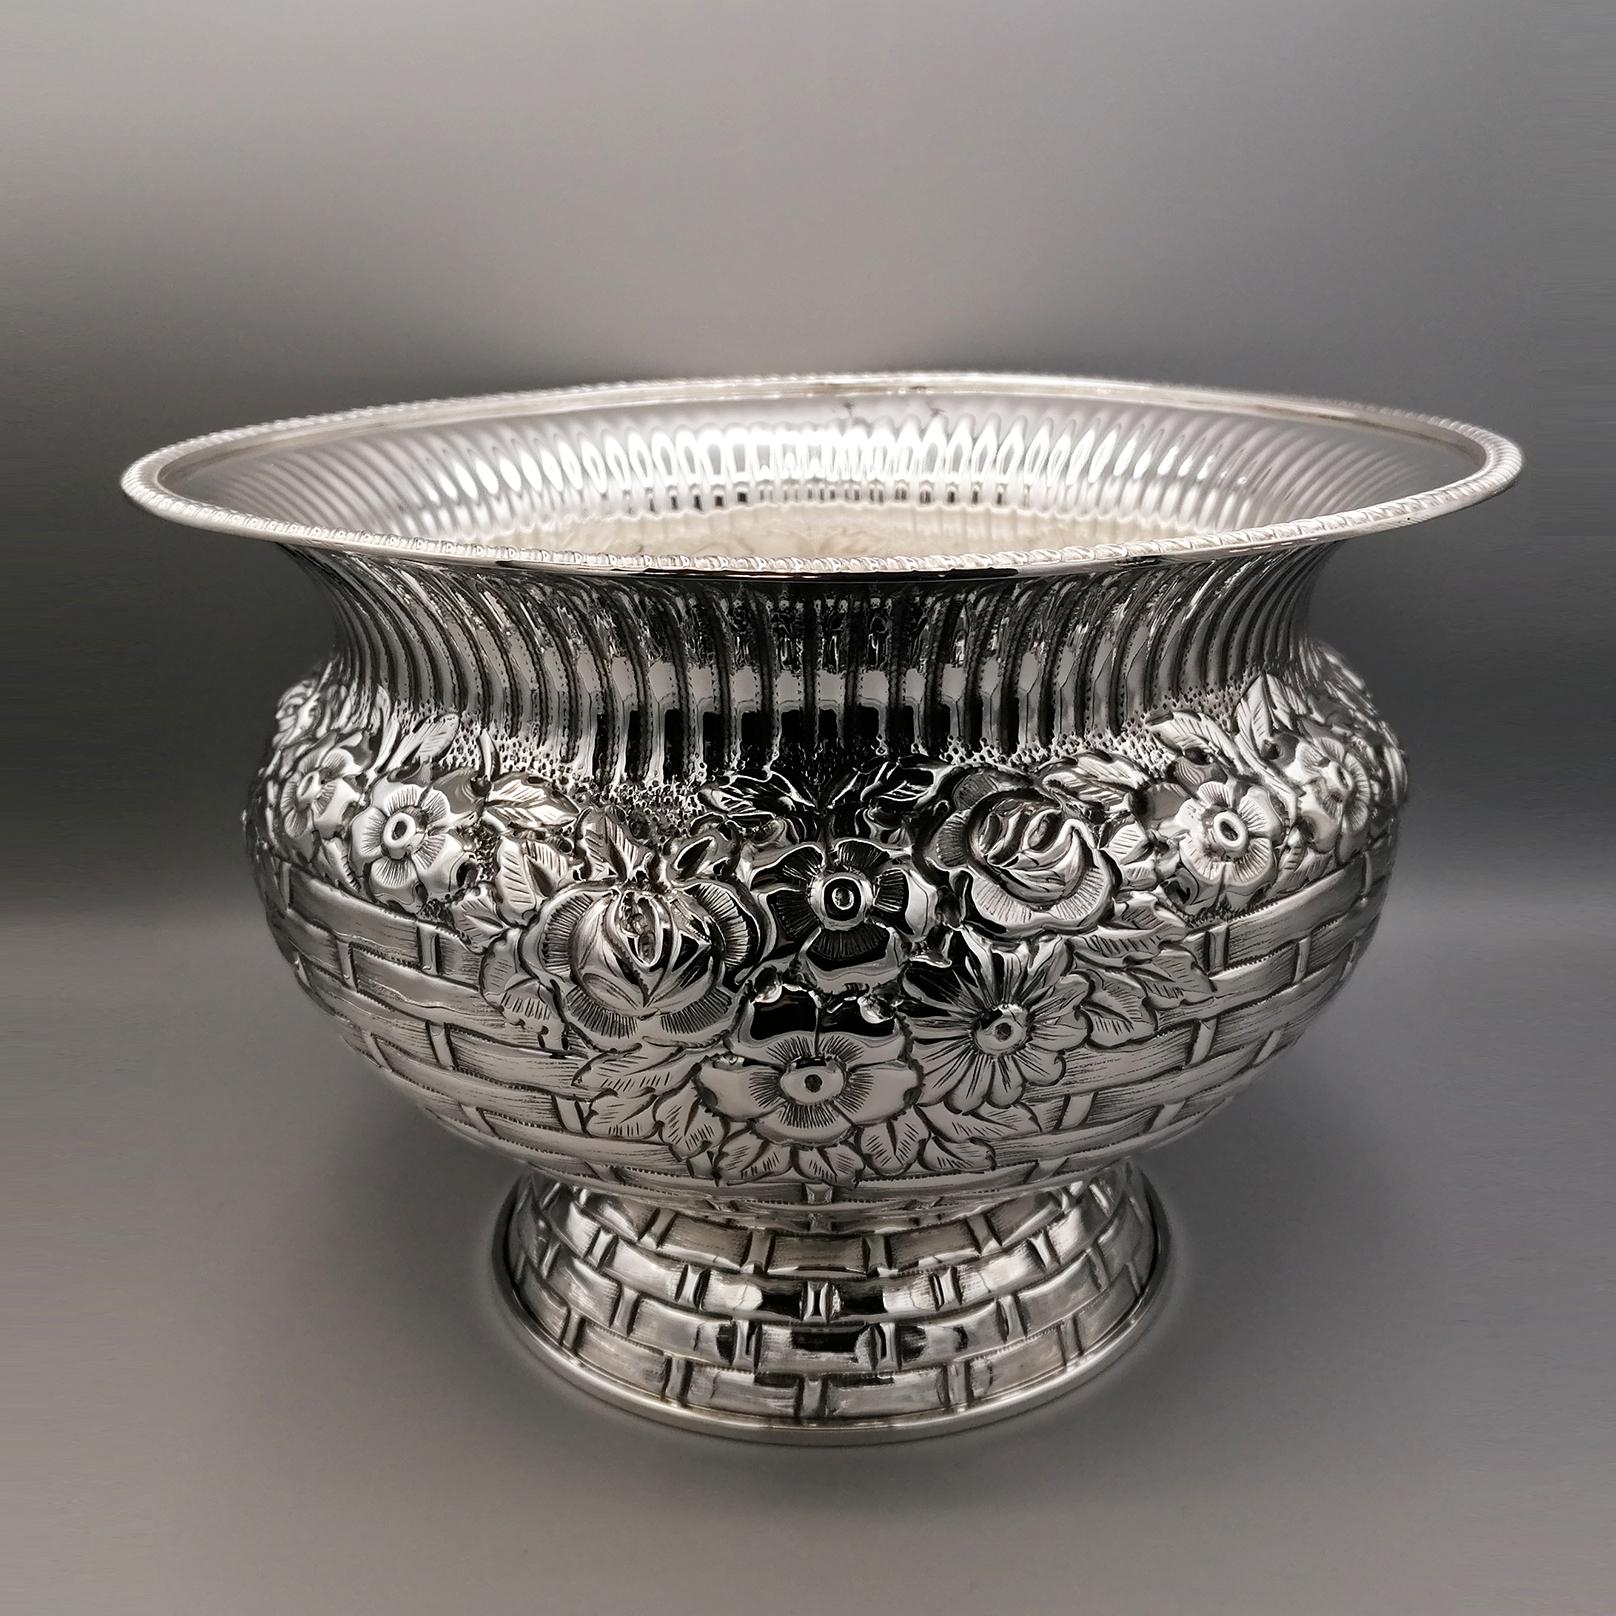 Imposing flower basket in solid 800 silver with base.
The body of the centerpiece is rounded and completely embossed by hand with a wicker basket design.
In the upper part of the central part, flowers of different types with their leaves have been